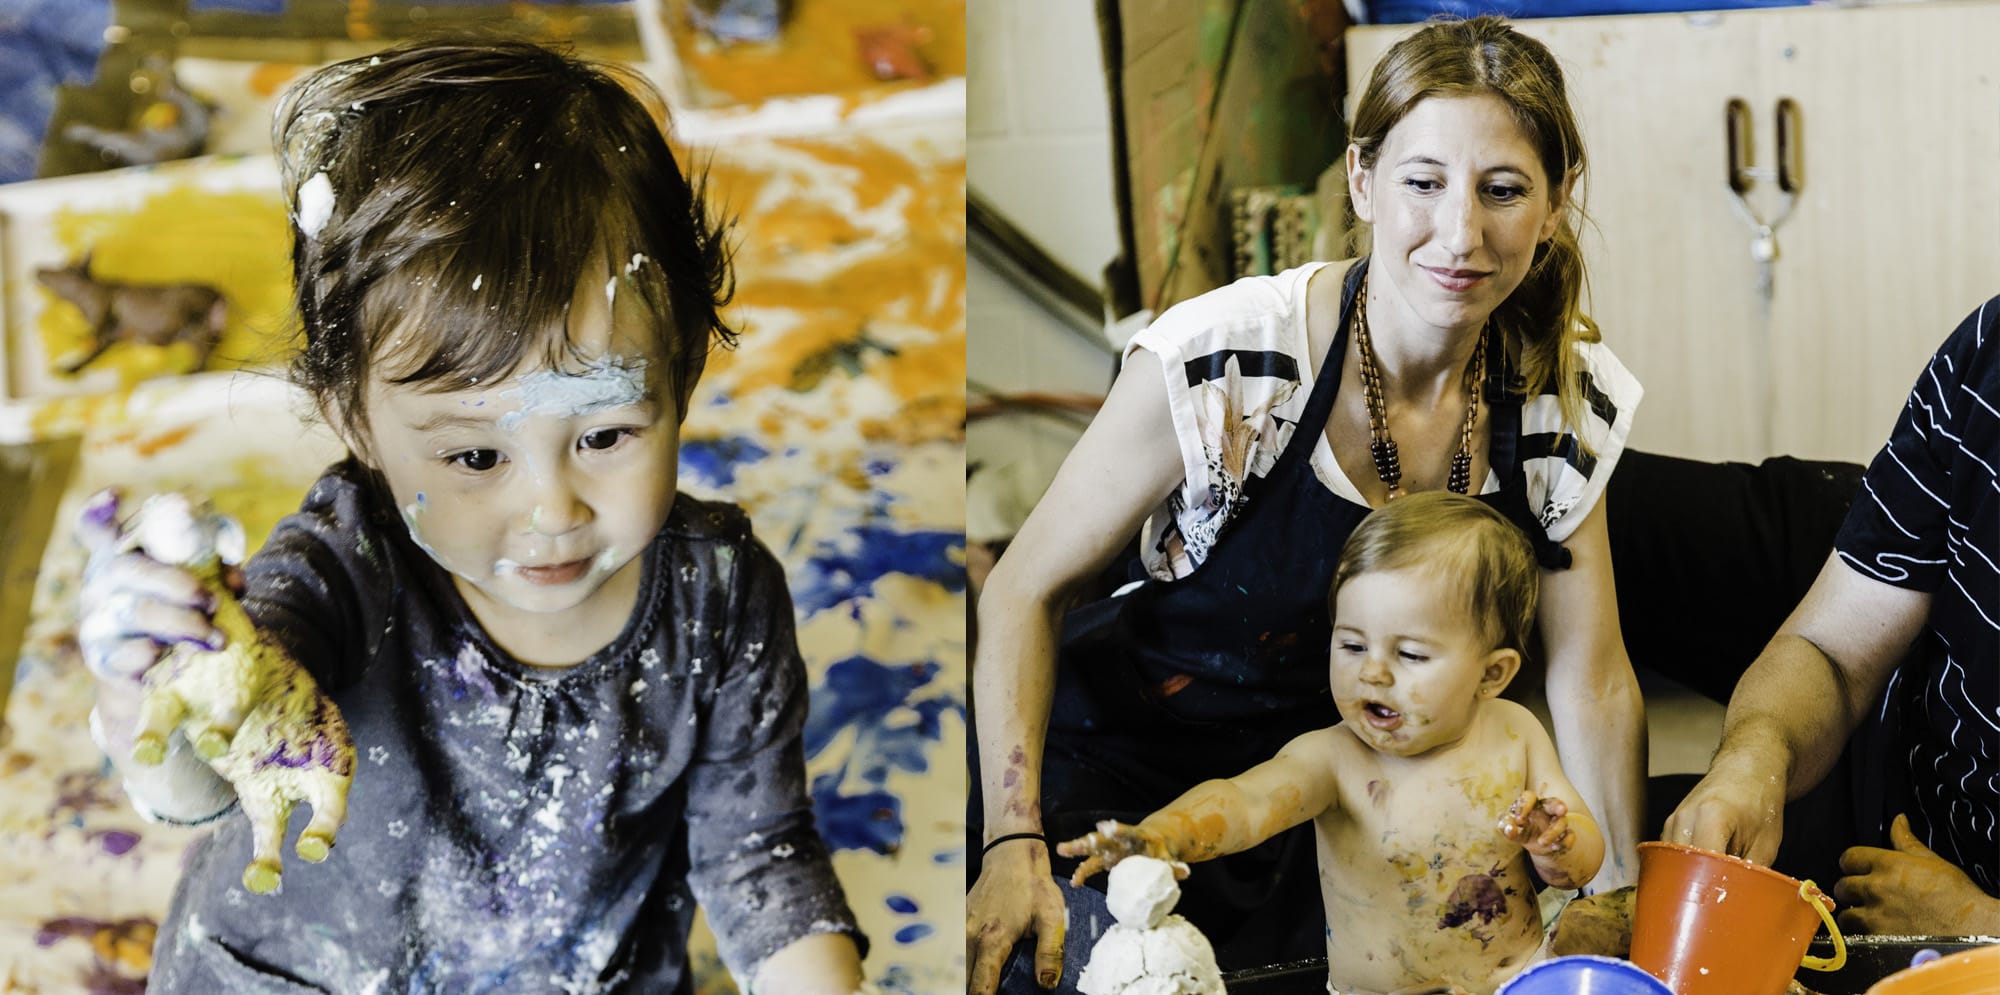 Smiling babies engage in messy play with blue and yellow paints